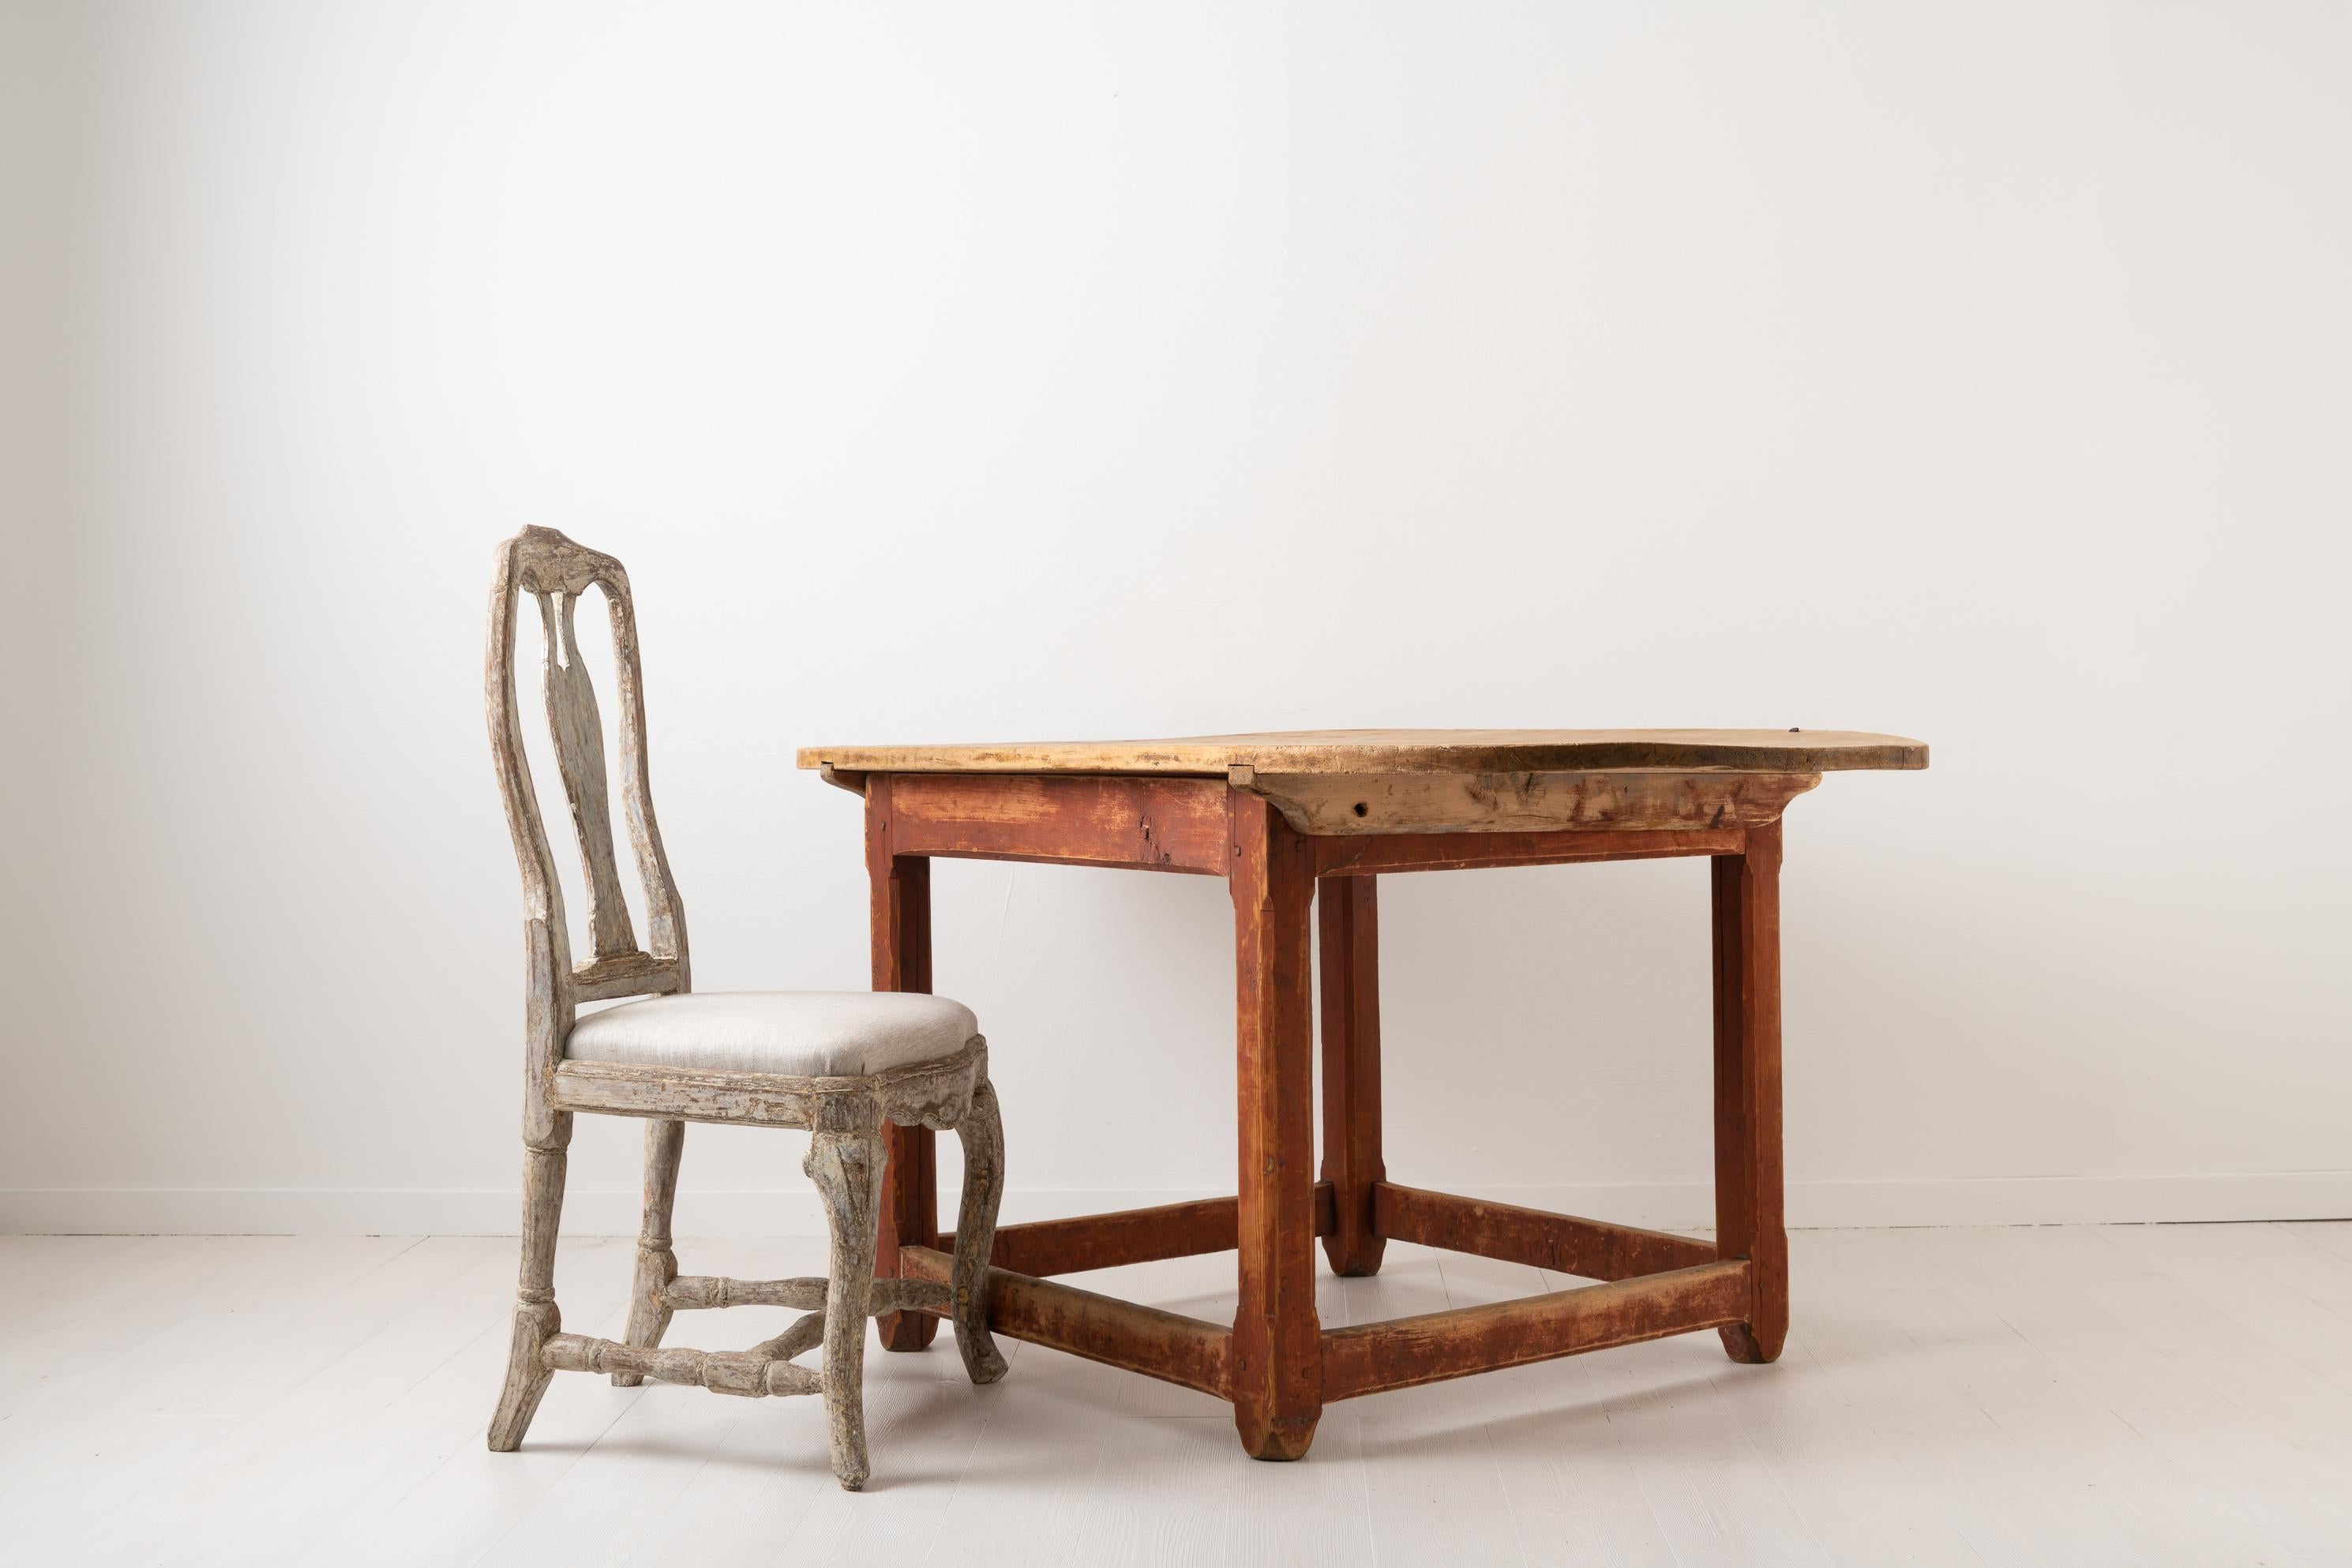 Swedish baroque centre table from the late 1700s. The table is a work table and rustic and primitive in its construction. The detached table top is made from three wooden planks over an inch / 3 cm thick and shows signs of continuous use. The use